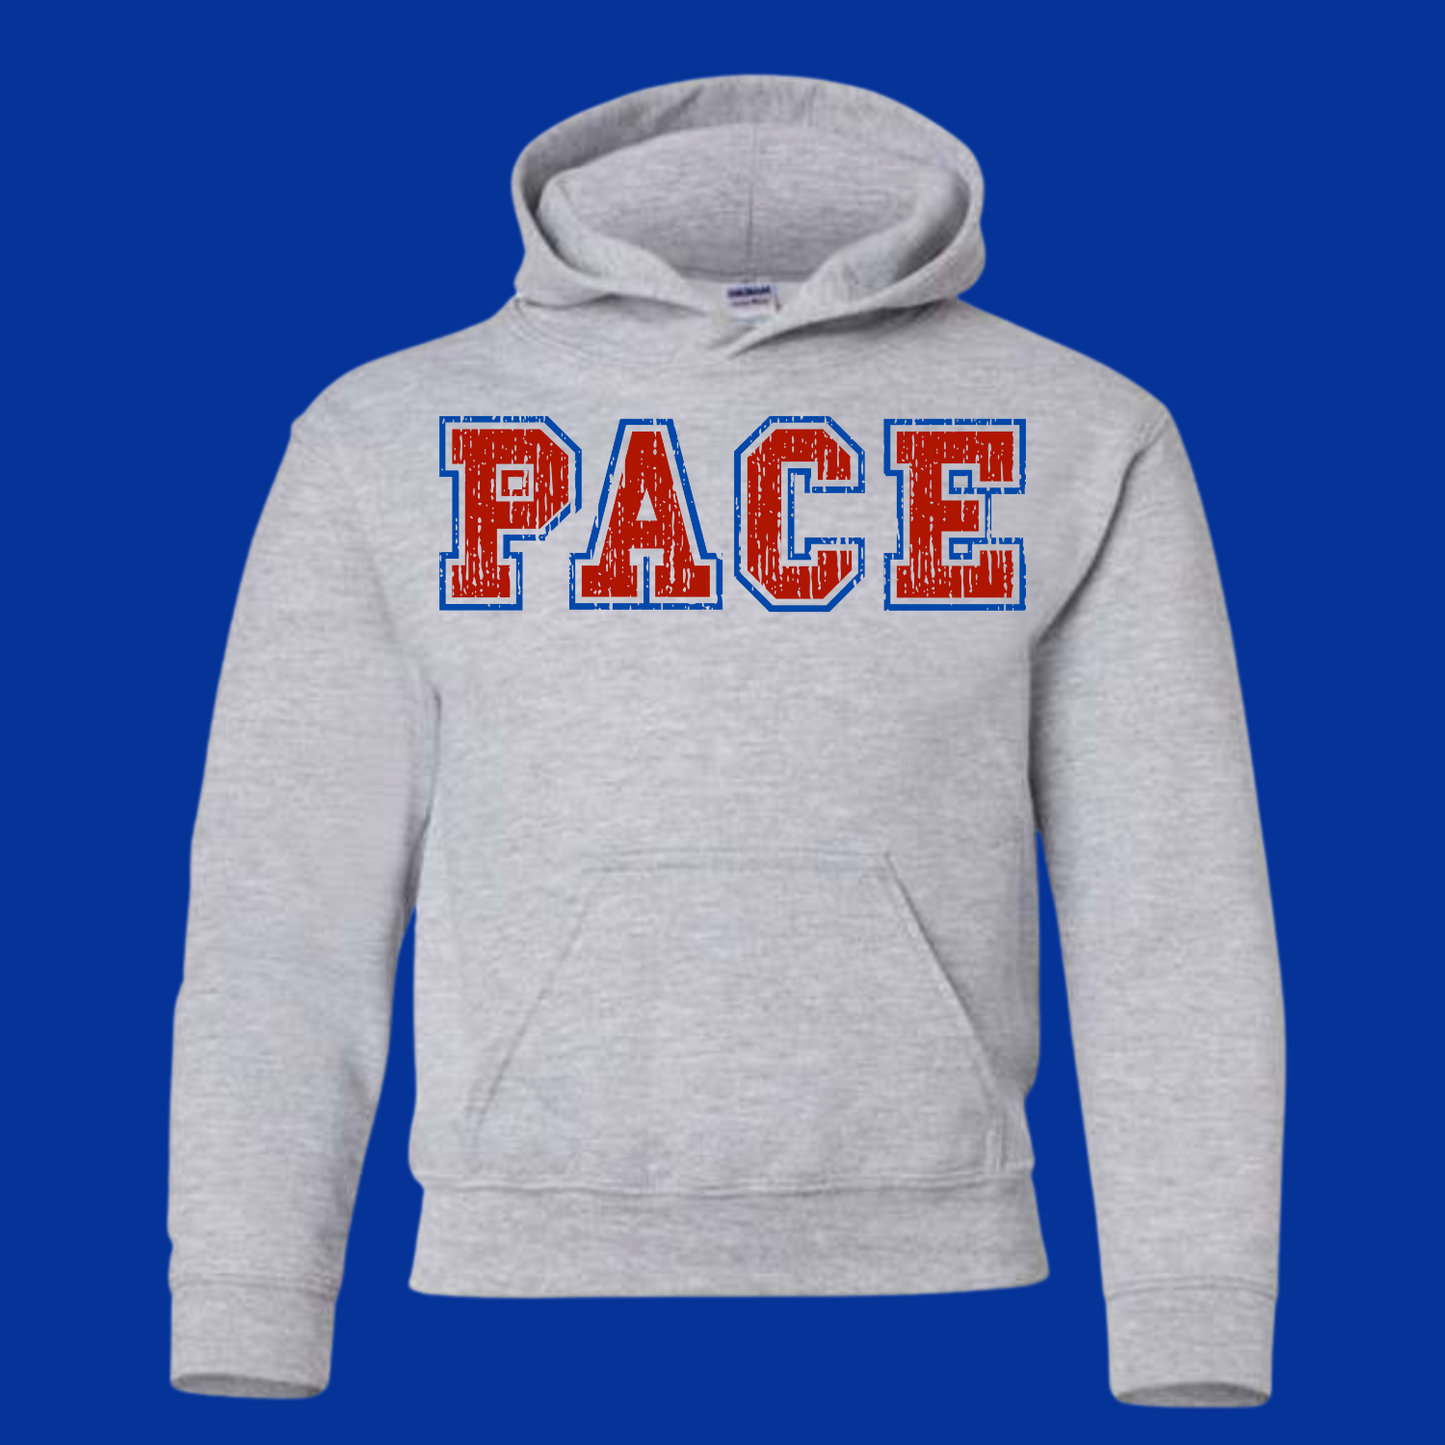 Pace Distressed Hoodie Youth